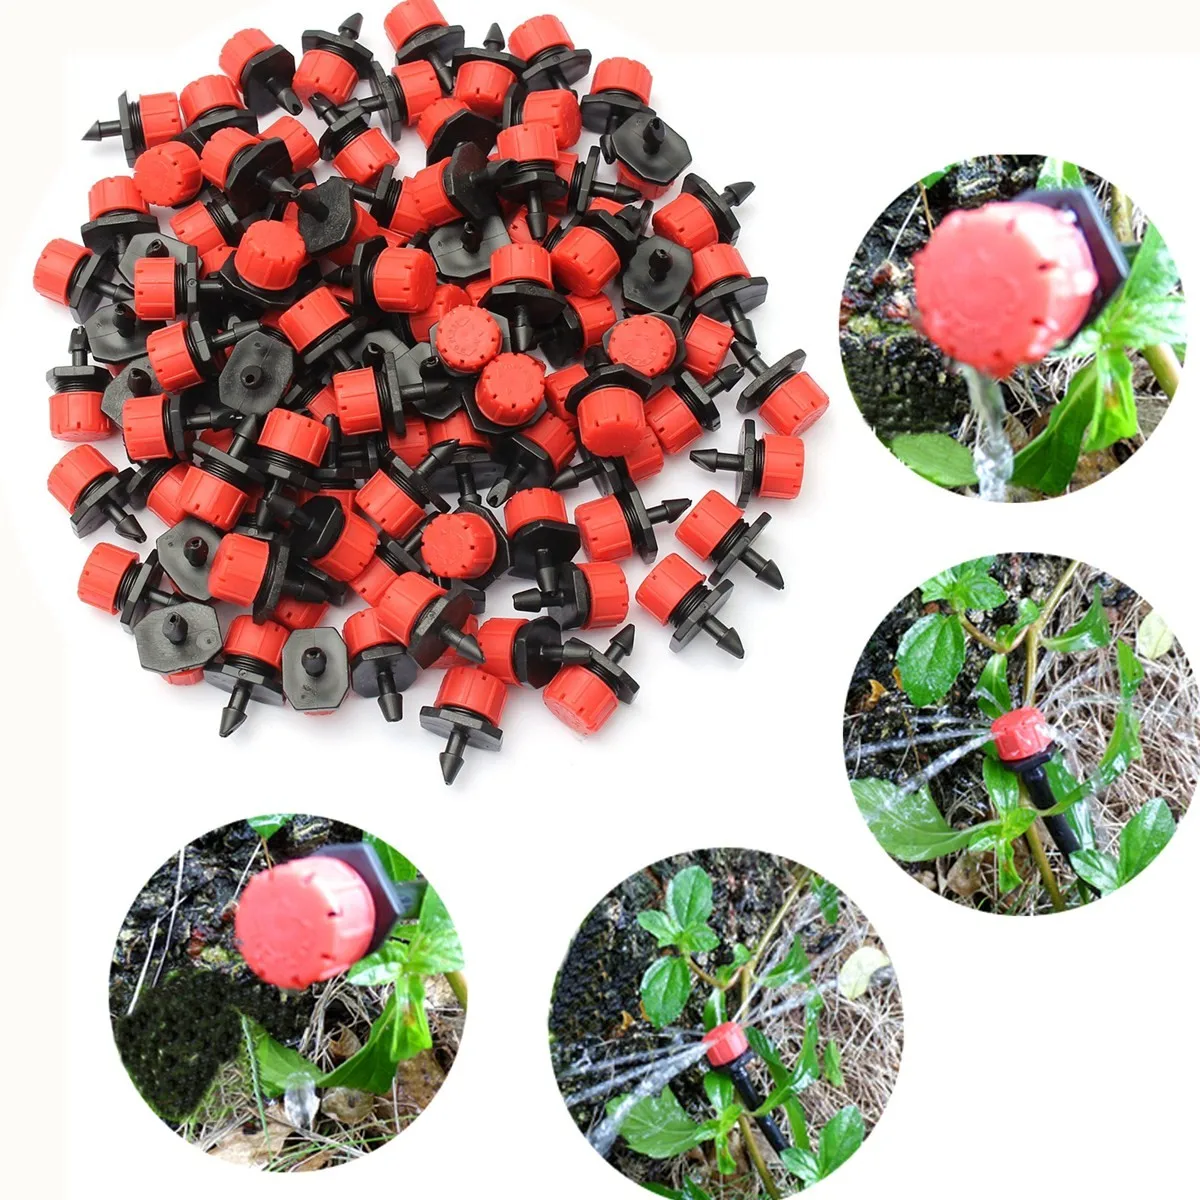 Red 100Pcs Adjustable Micro Drip Irrigation Watering Anti-clogging Emitter Dripper Watering System Automatic Hose Kits Connector